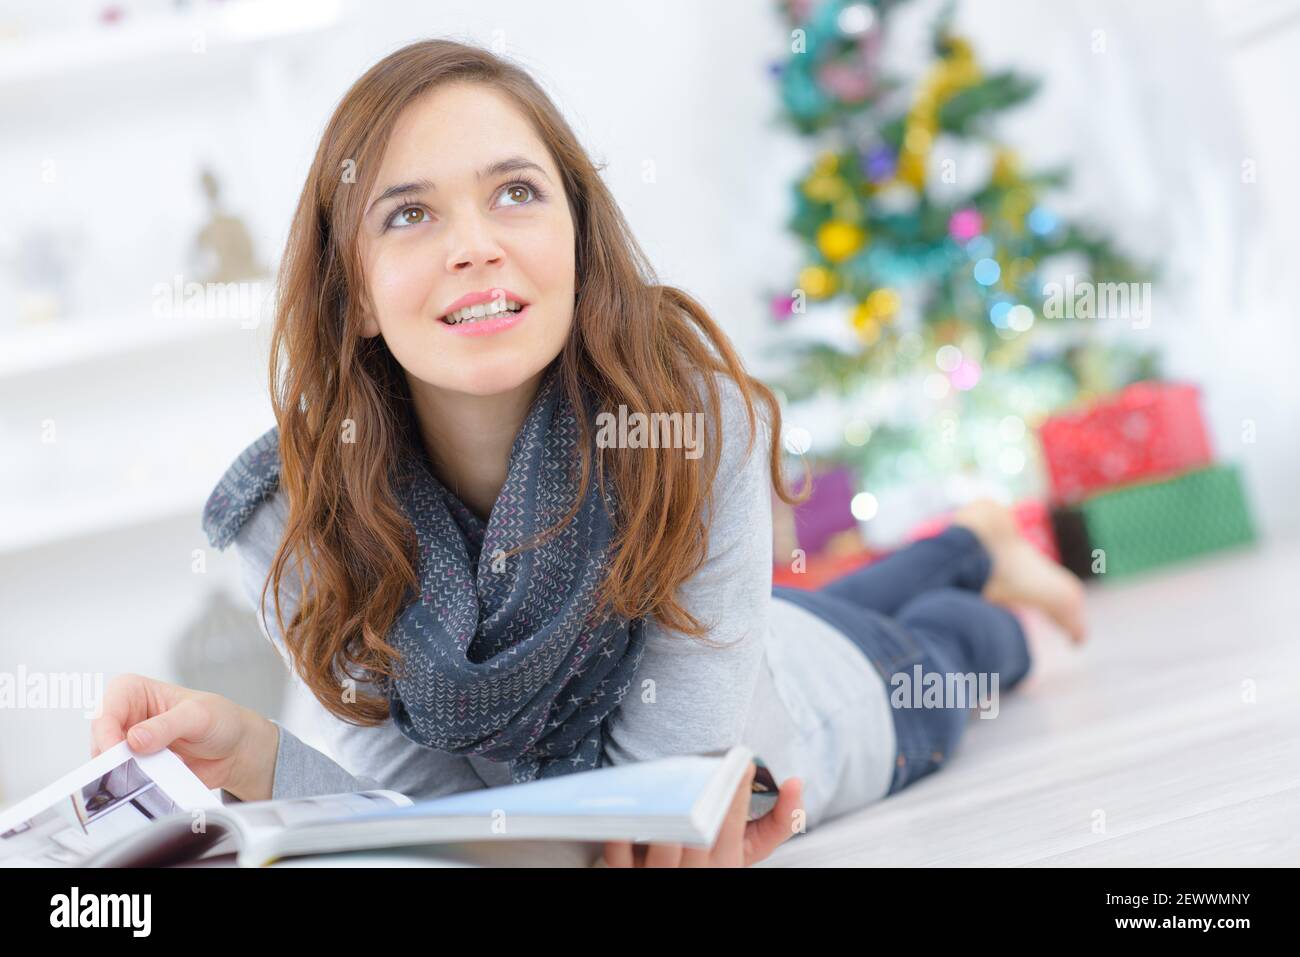 woman layed on floor flicking through magazine at christmas Stock Photo